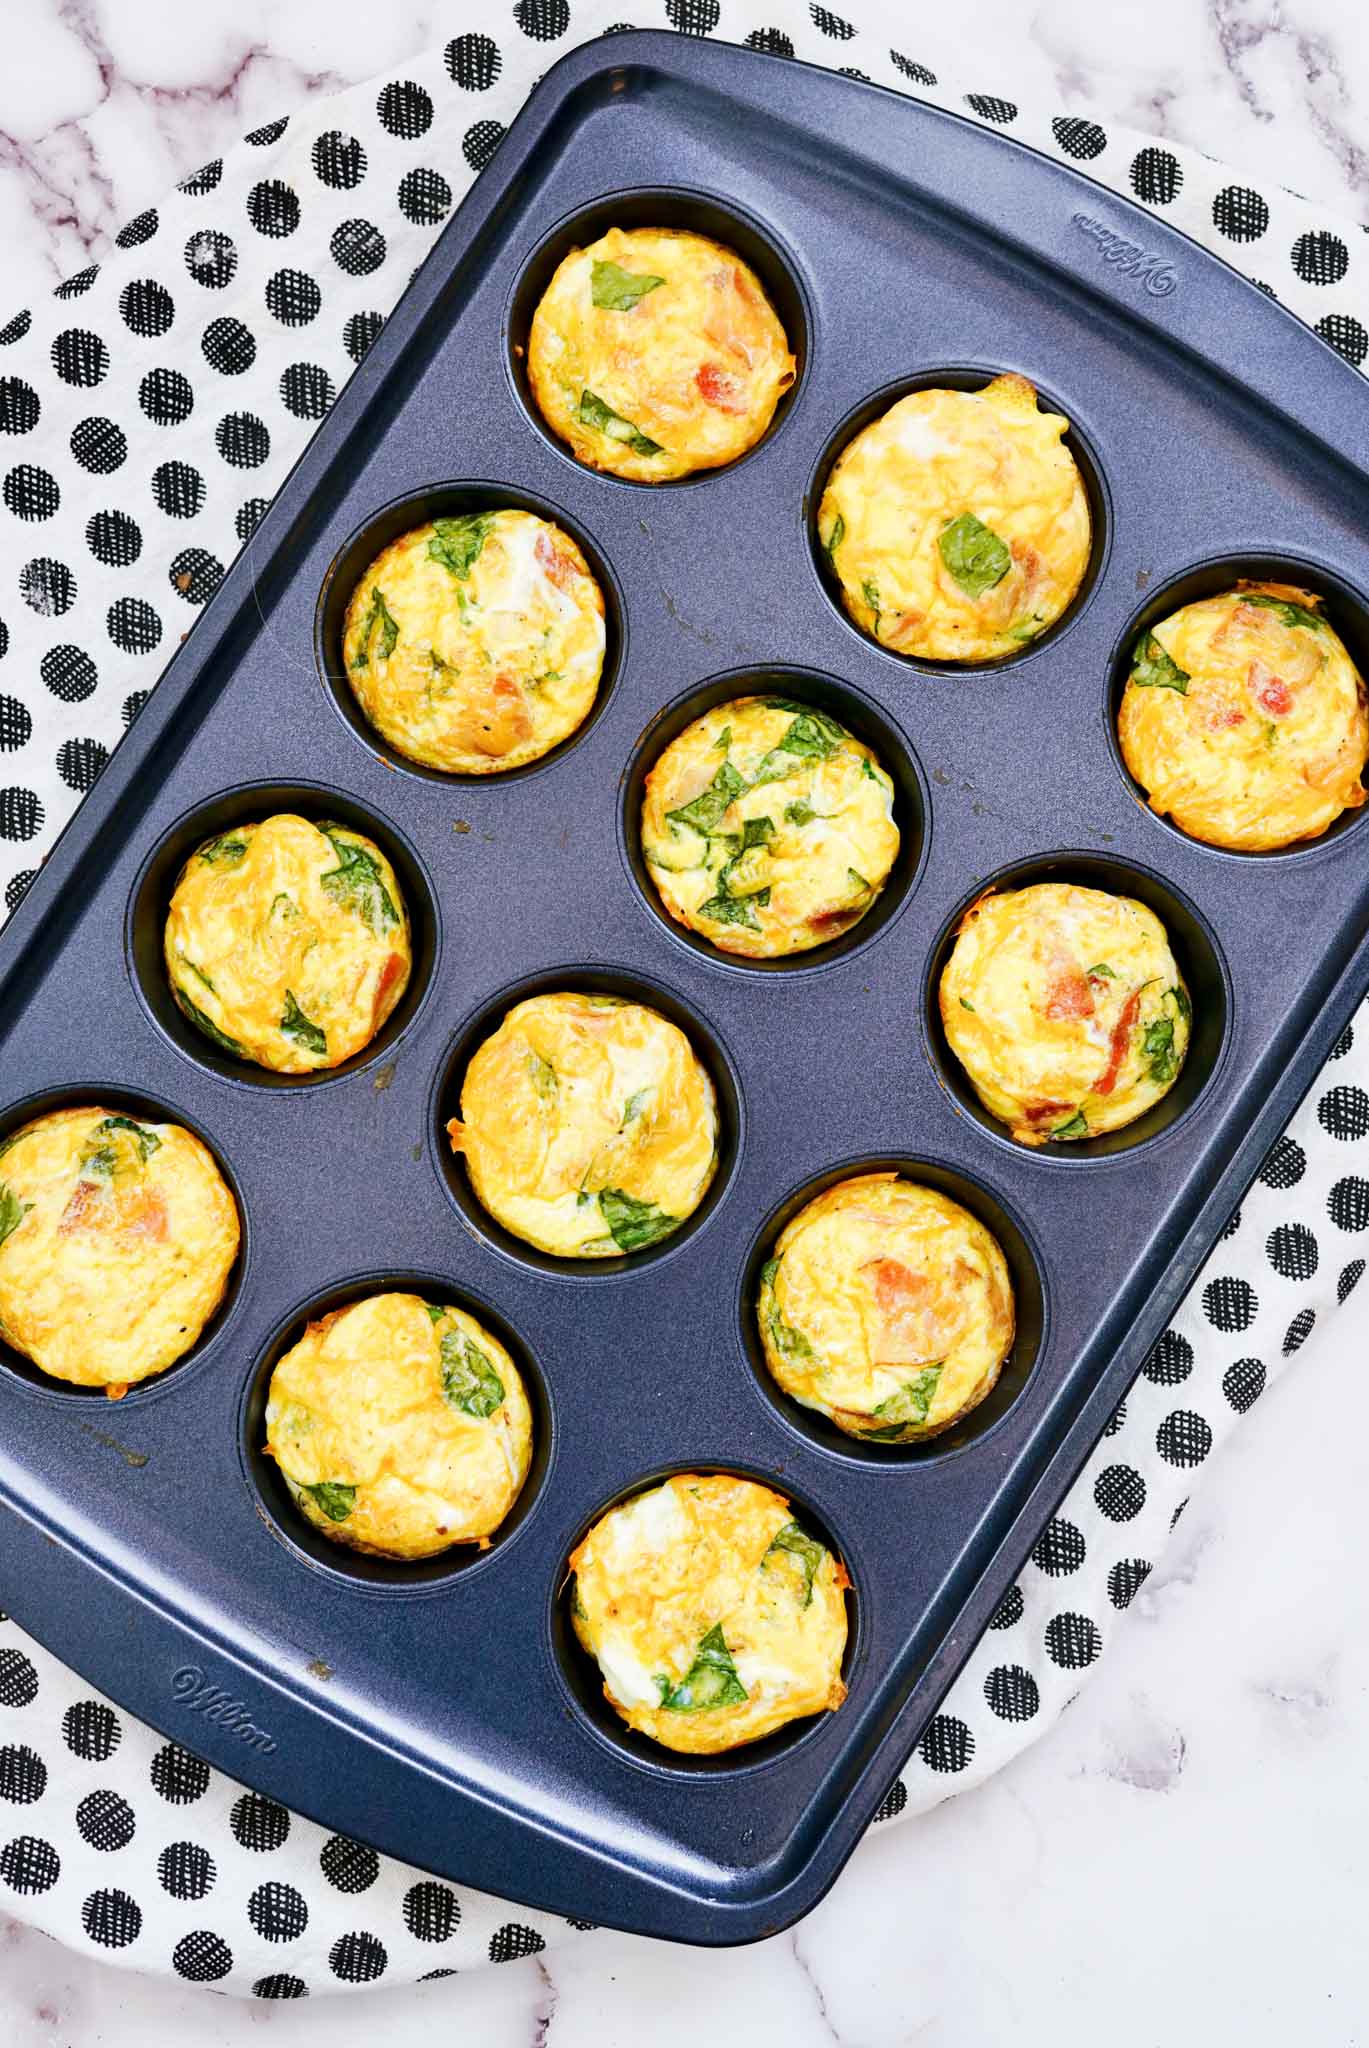 Spinach Cheese and Bacon Egg Bites